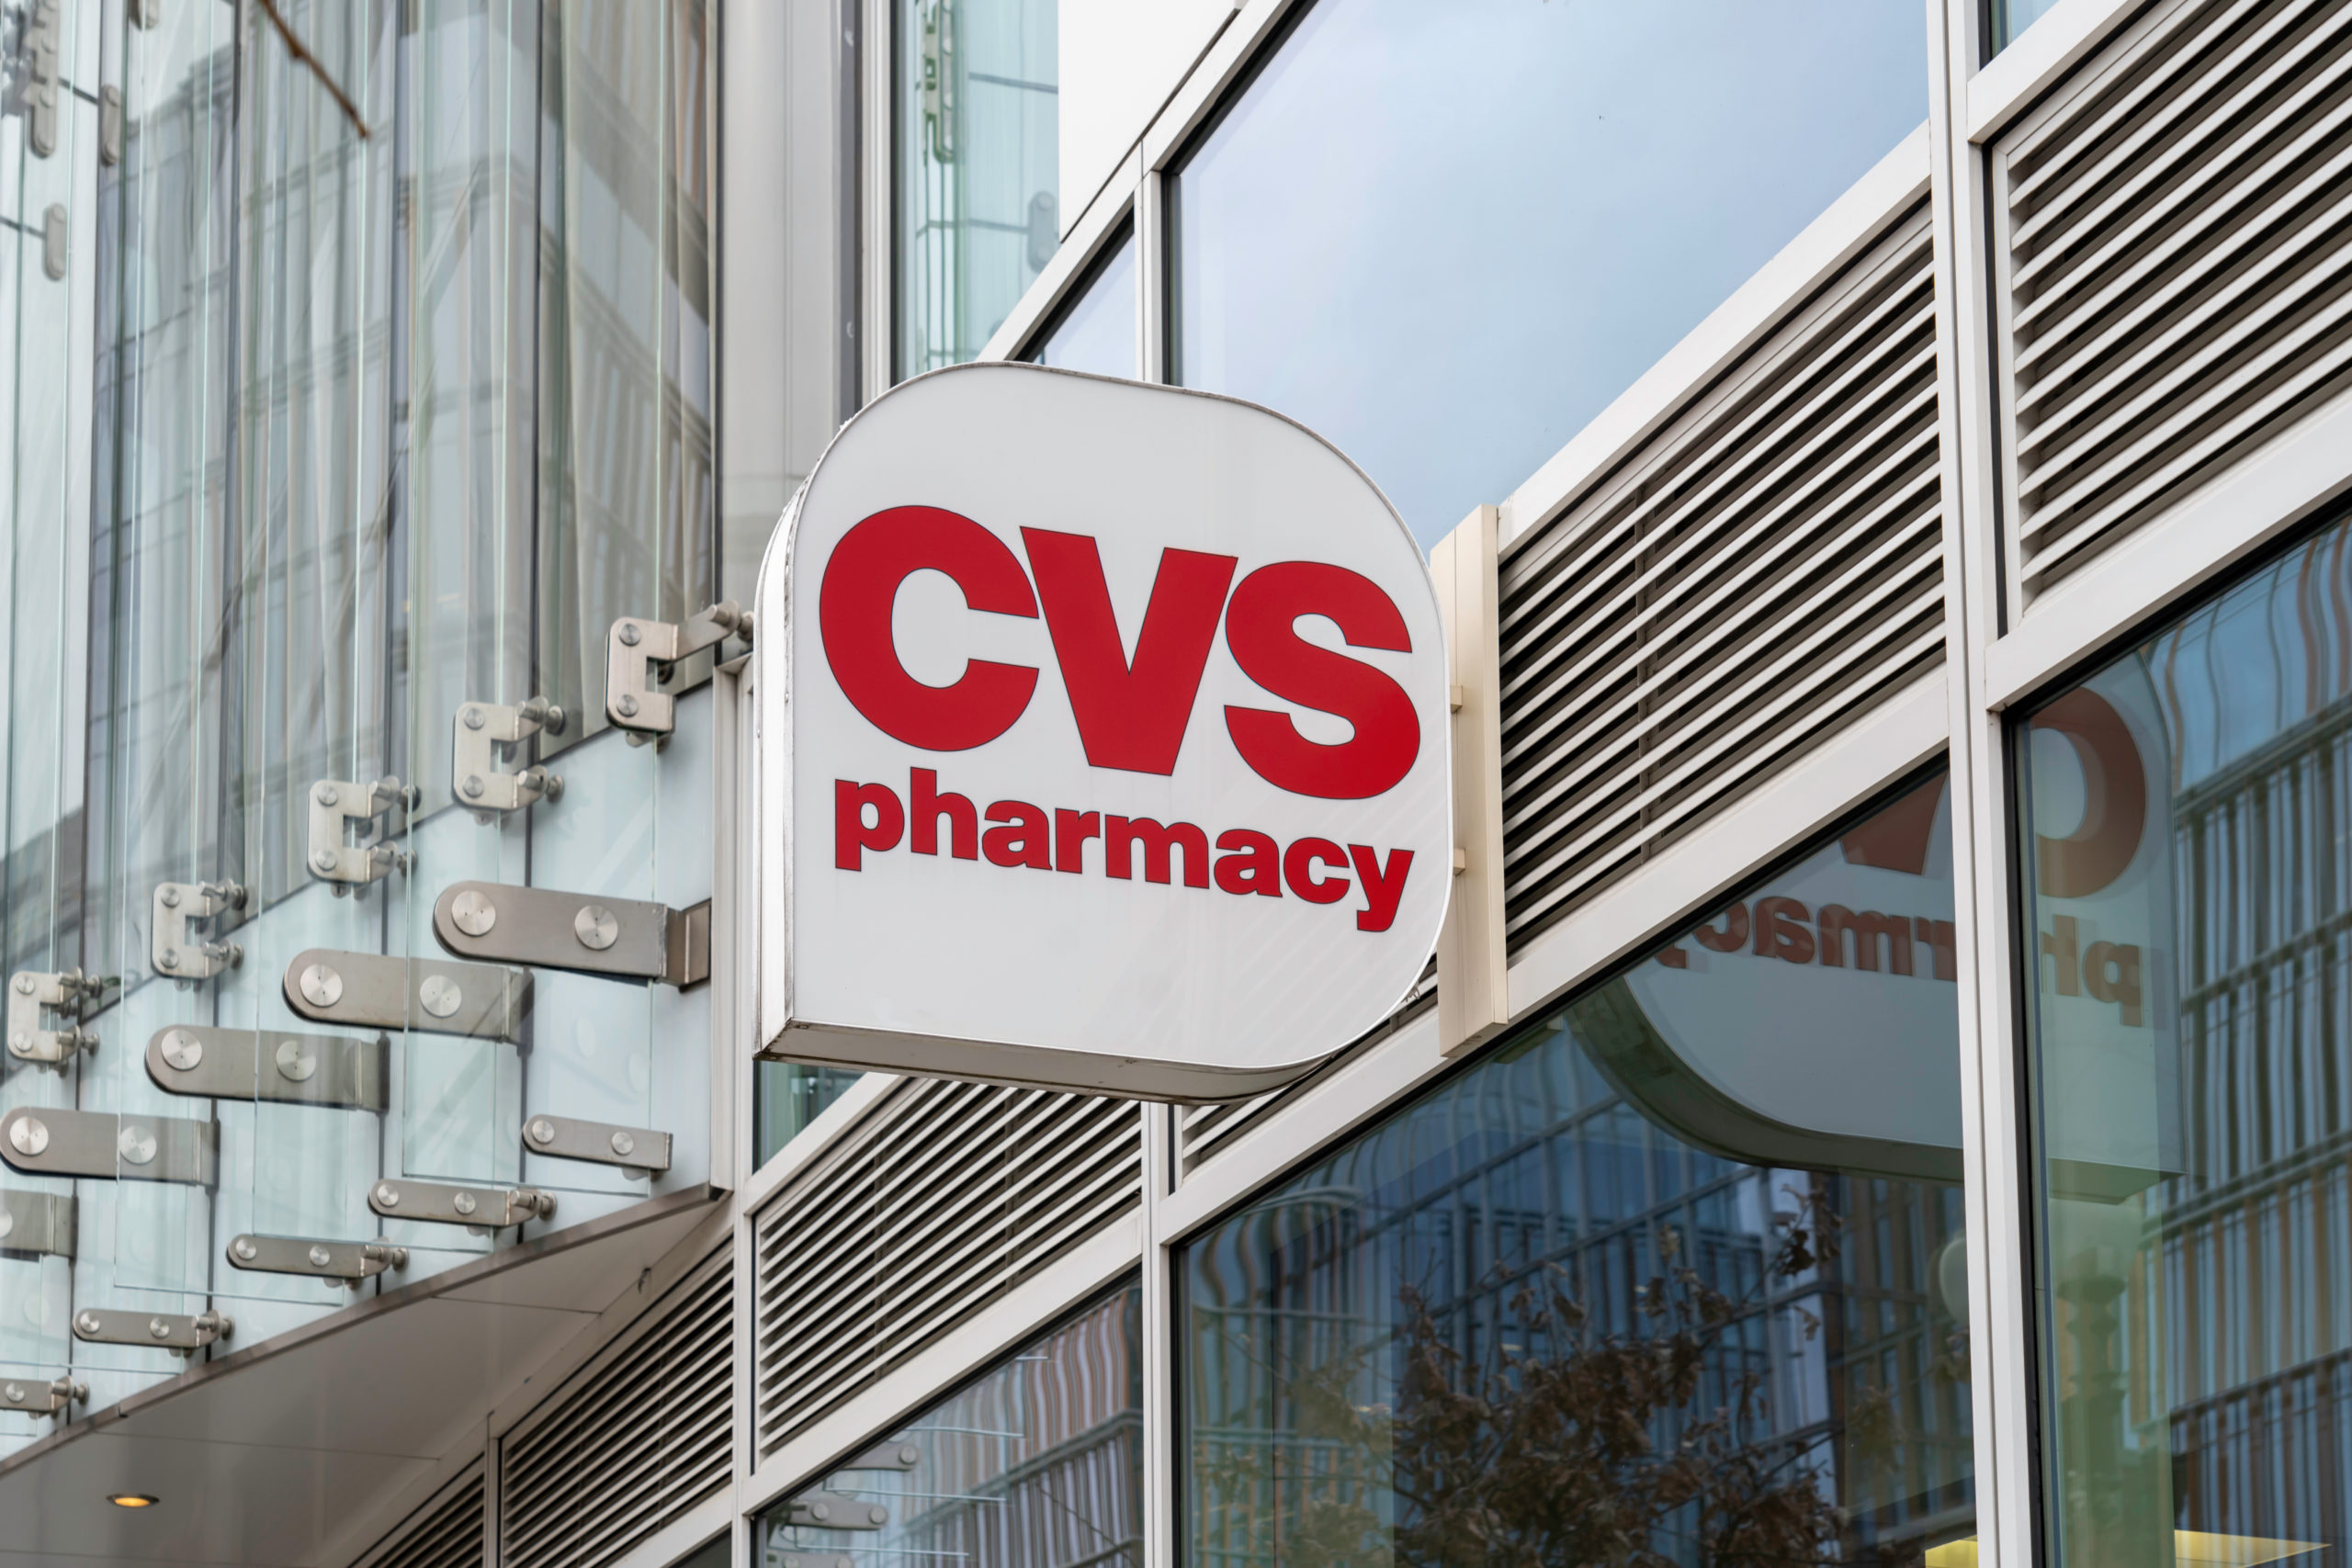 So Long CVS, We’re with Walgreens